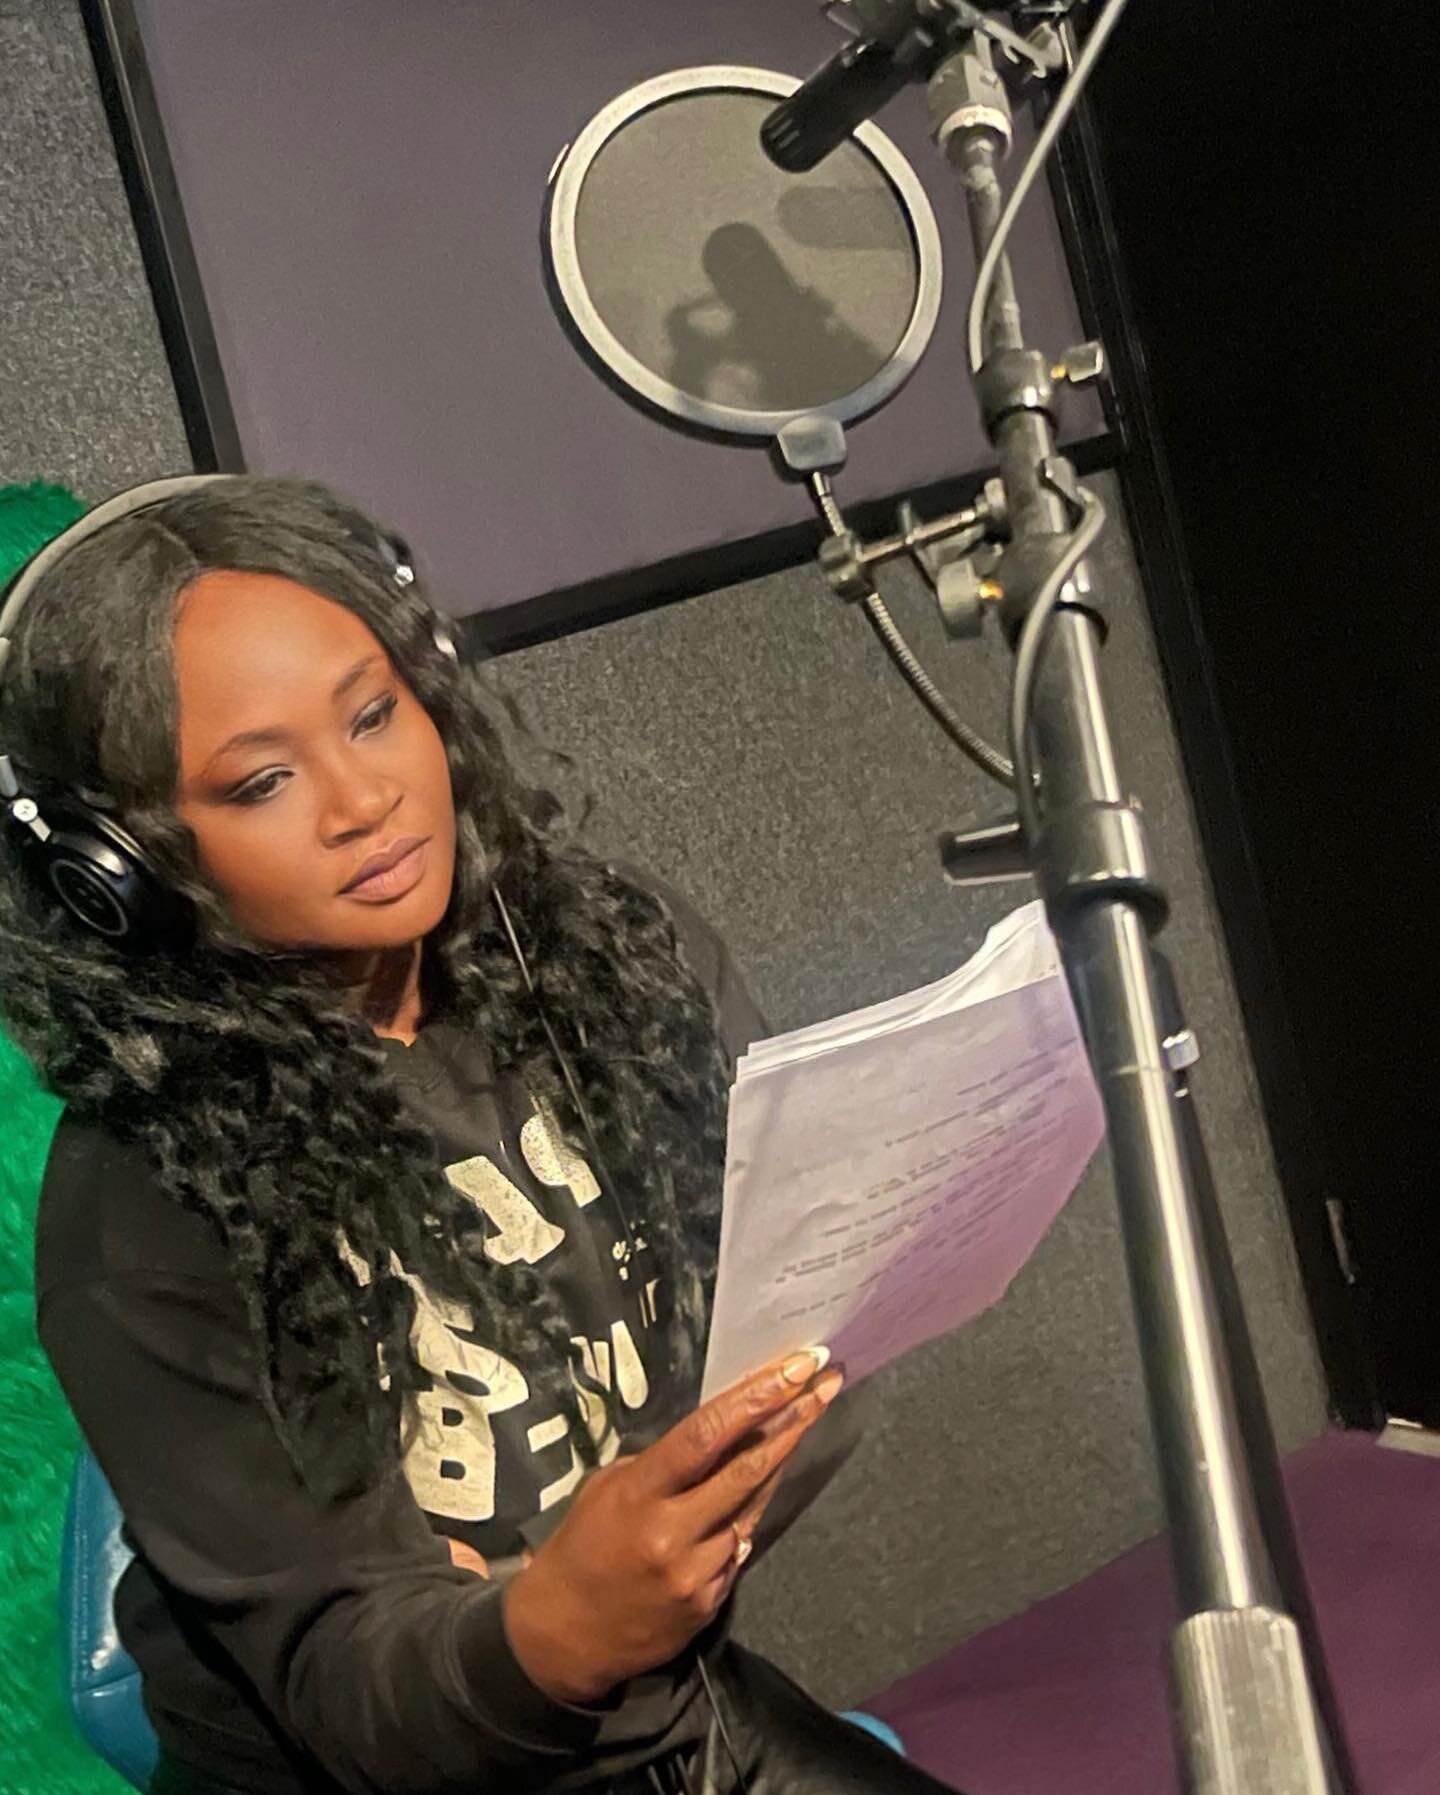 As an actress not often you get to use your Jamaican patois🇯🇲And when you get the opportunity, it&rsquo;s go time. Looking forward to seeing more authentic Caribbean voices. 🗣🔇 🎙🎧 🇯🇲#representationmatters #jamaicansinhollywood #voiceacting #v